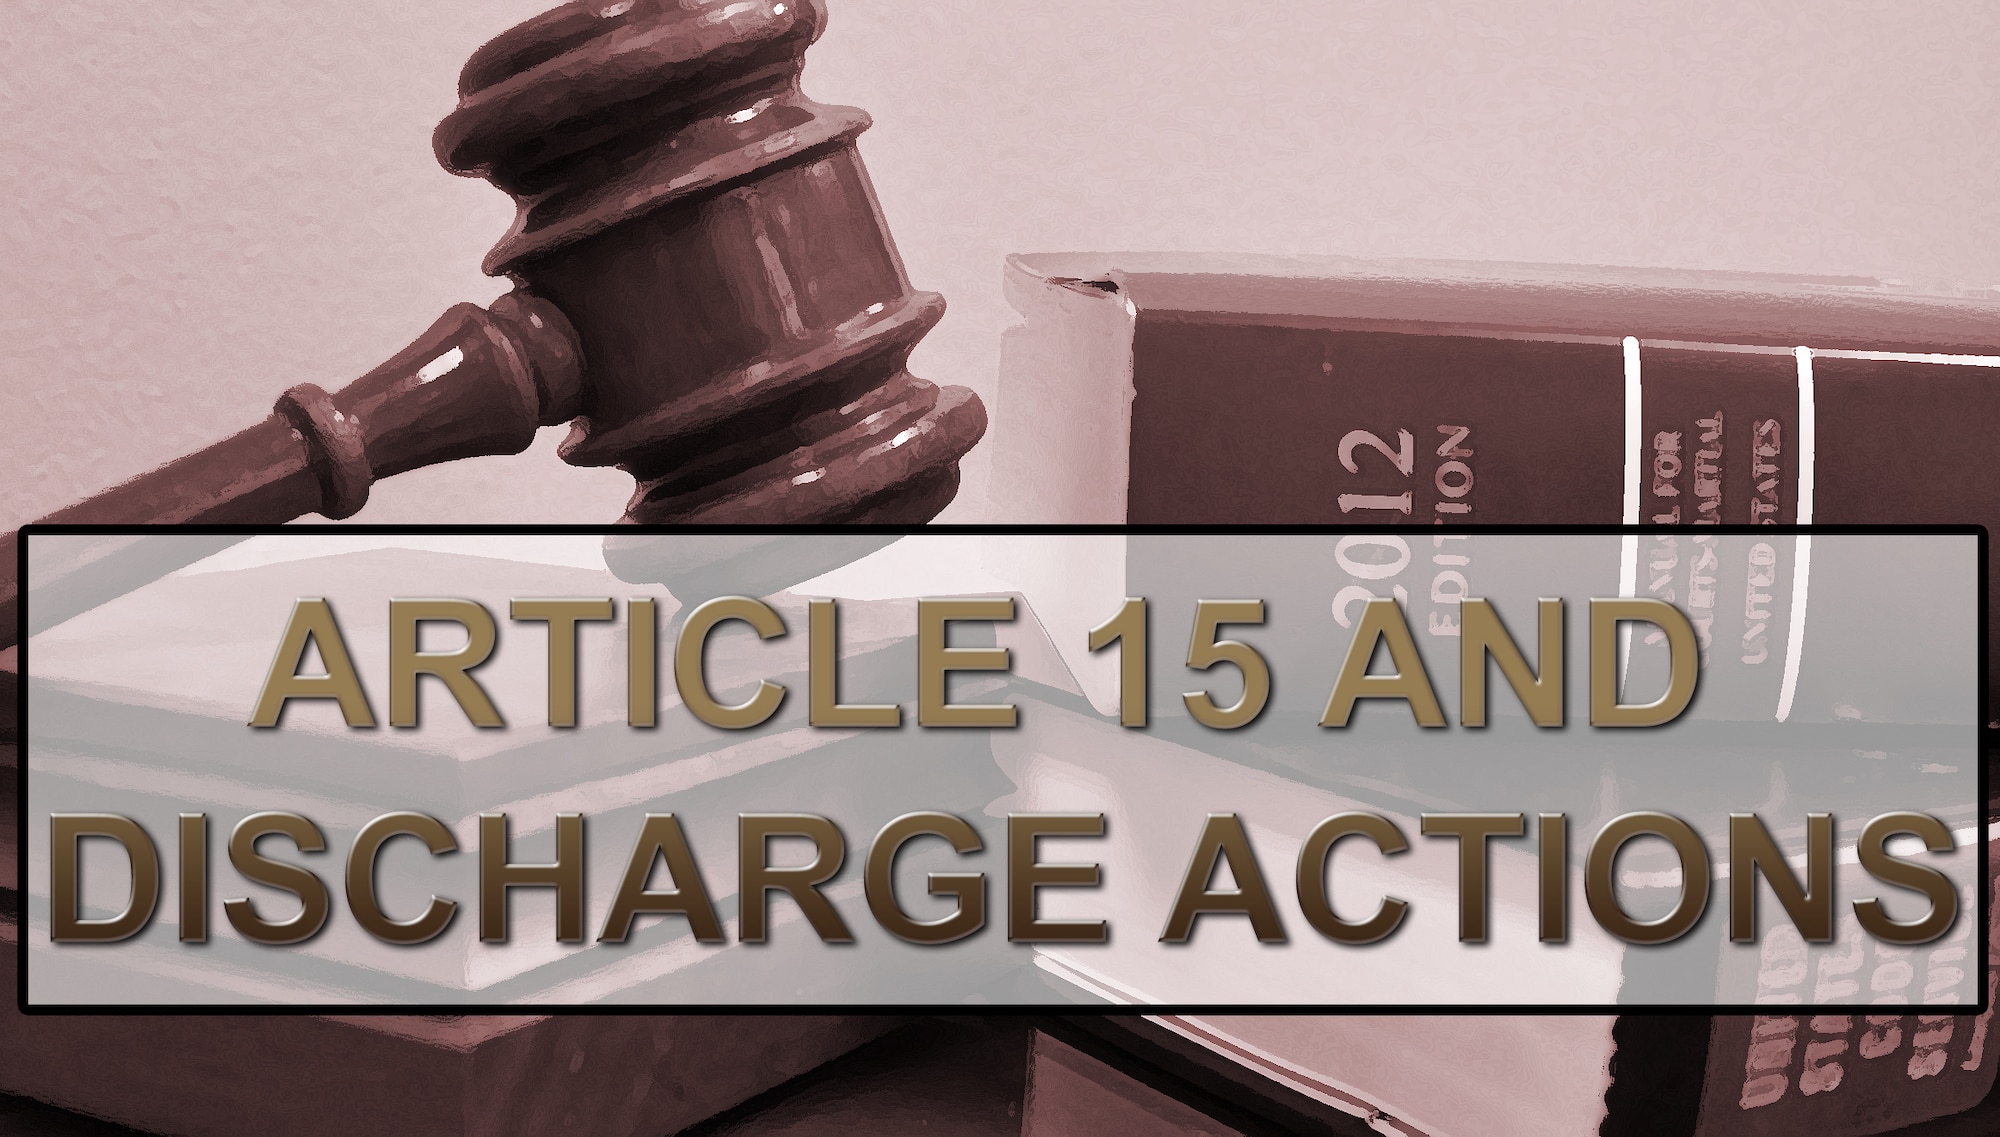 Article 15 and discharge actions. (U.S. Air Force graphic by Airman 1st Class Erica Rodriguez)